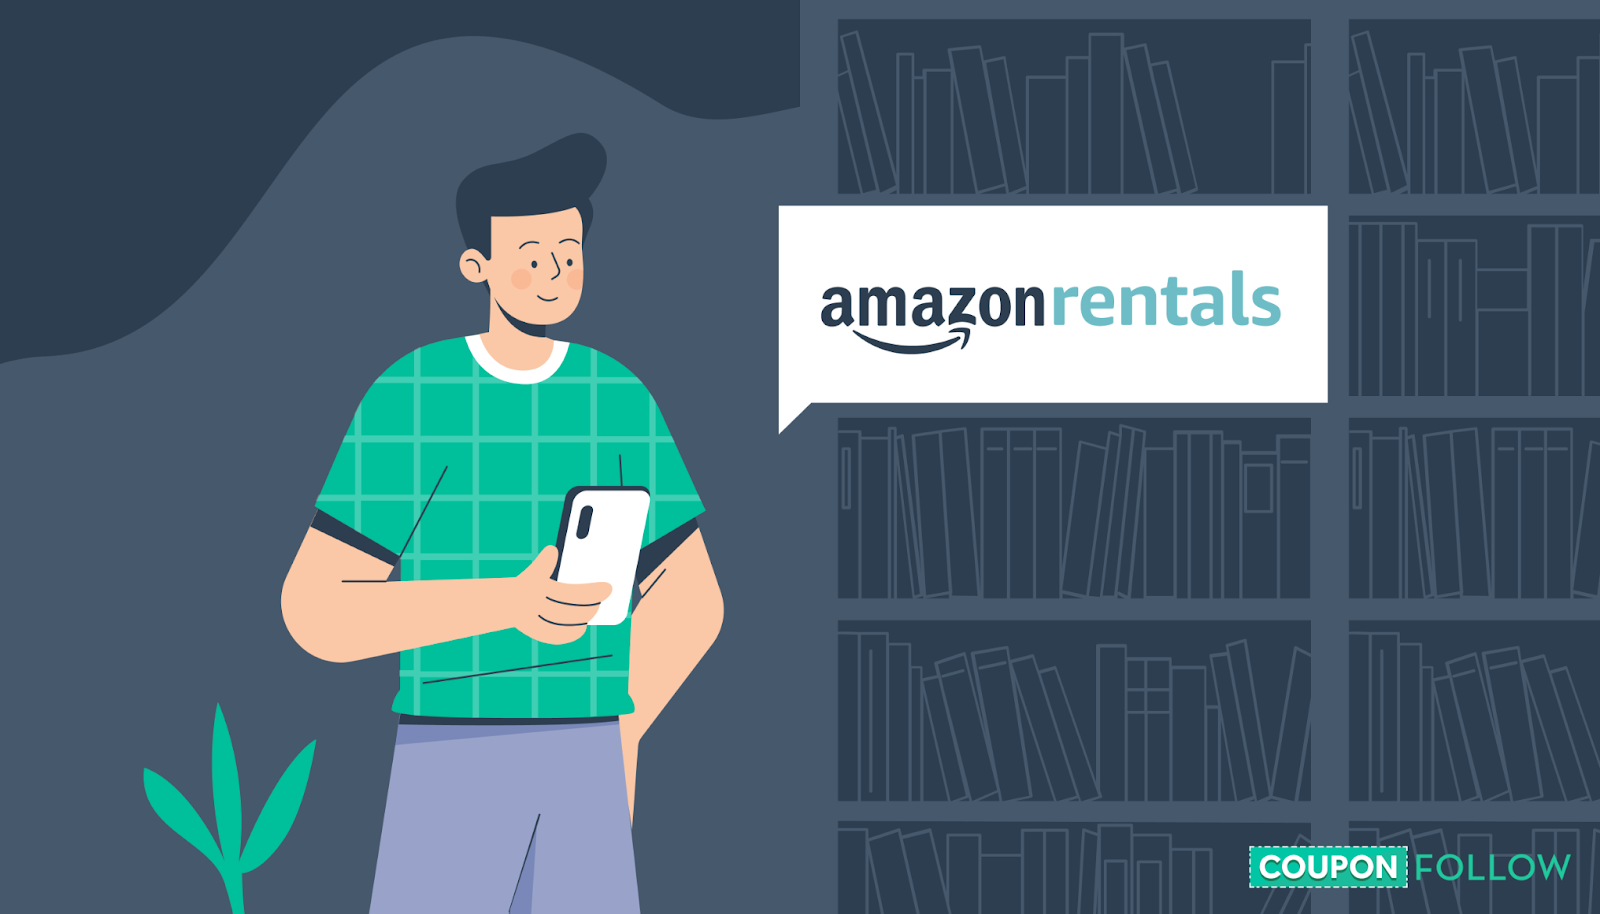 Illustration of student on mobile with Amazon logo on screen